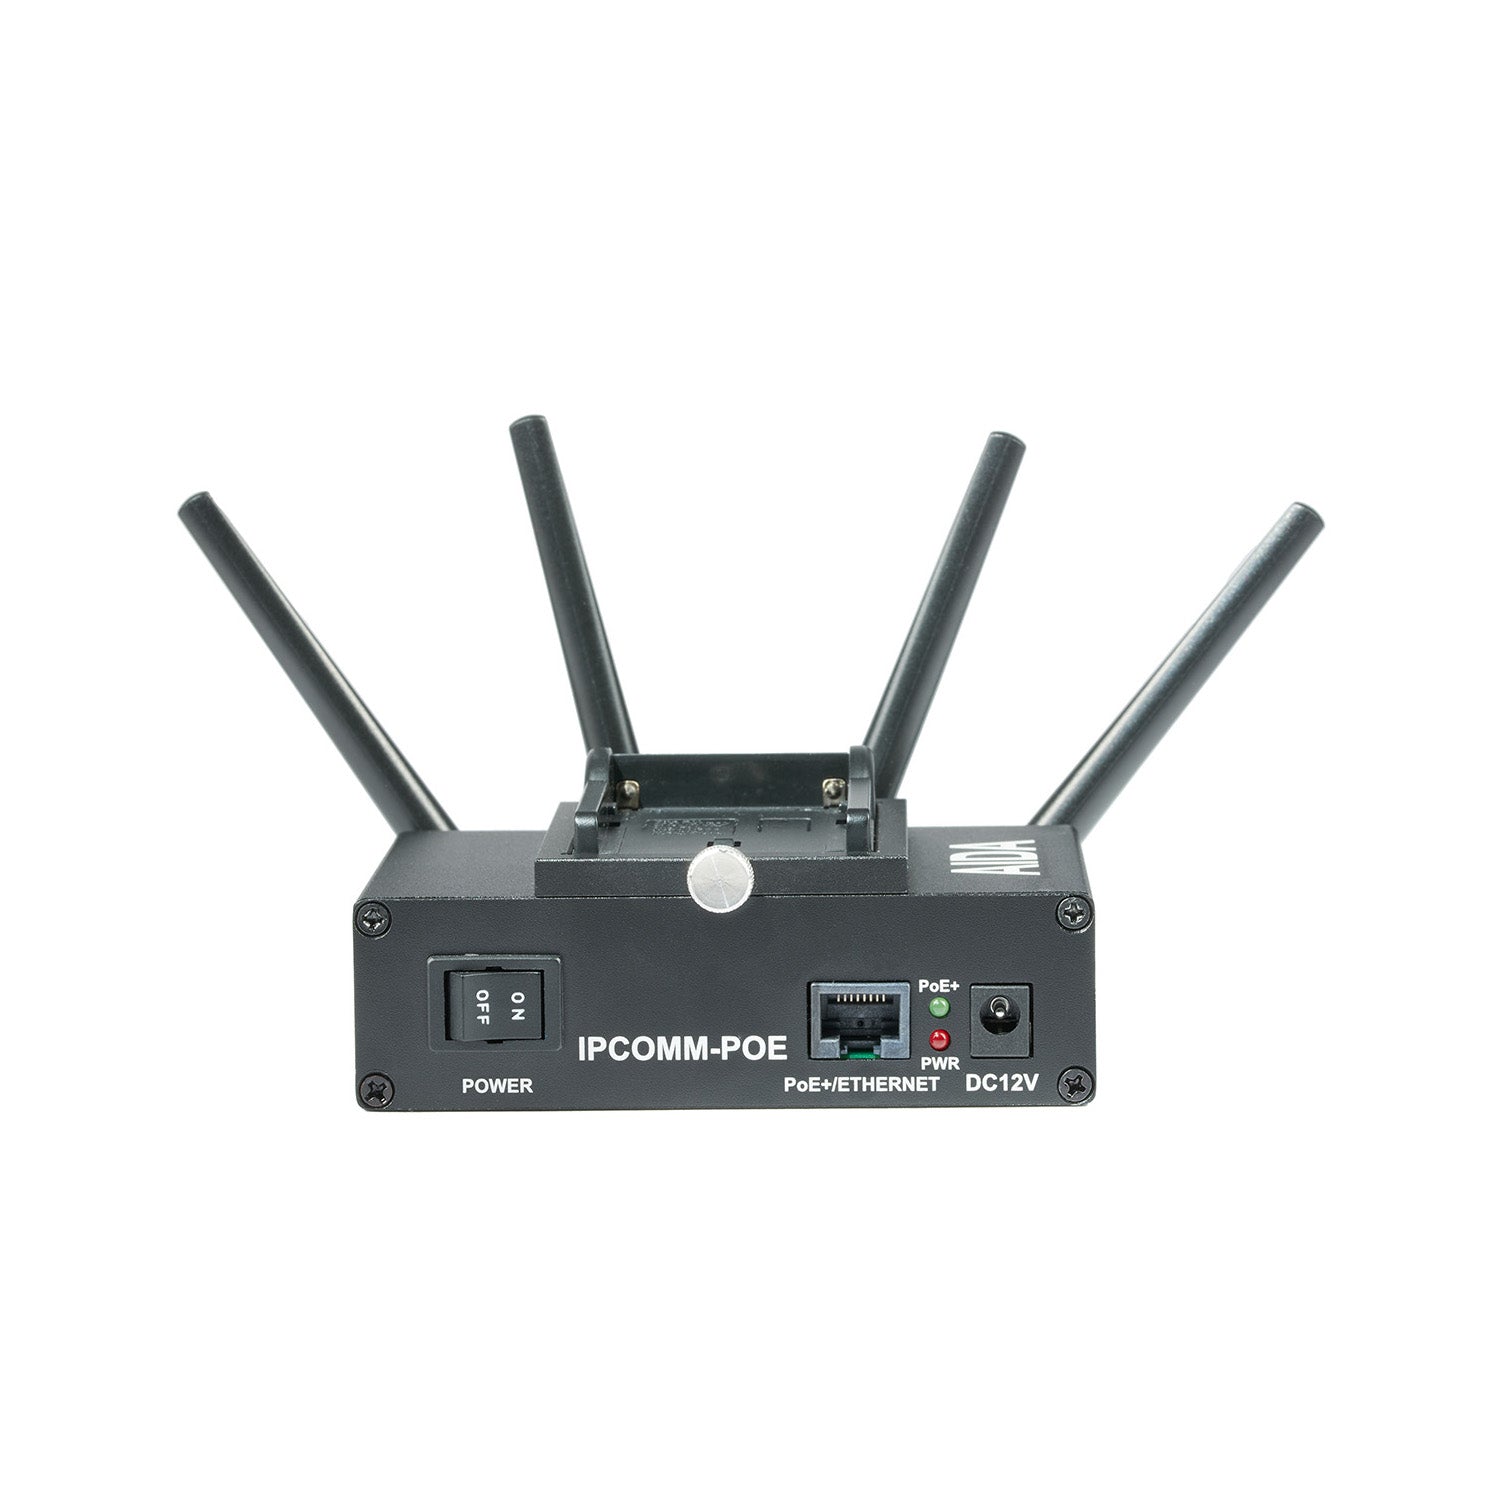 AIDA Imaging IPCOMM-POE - Portable Wireless Video Transmitter with PoE, front